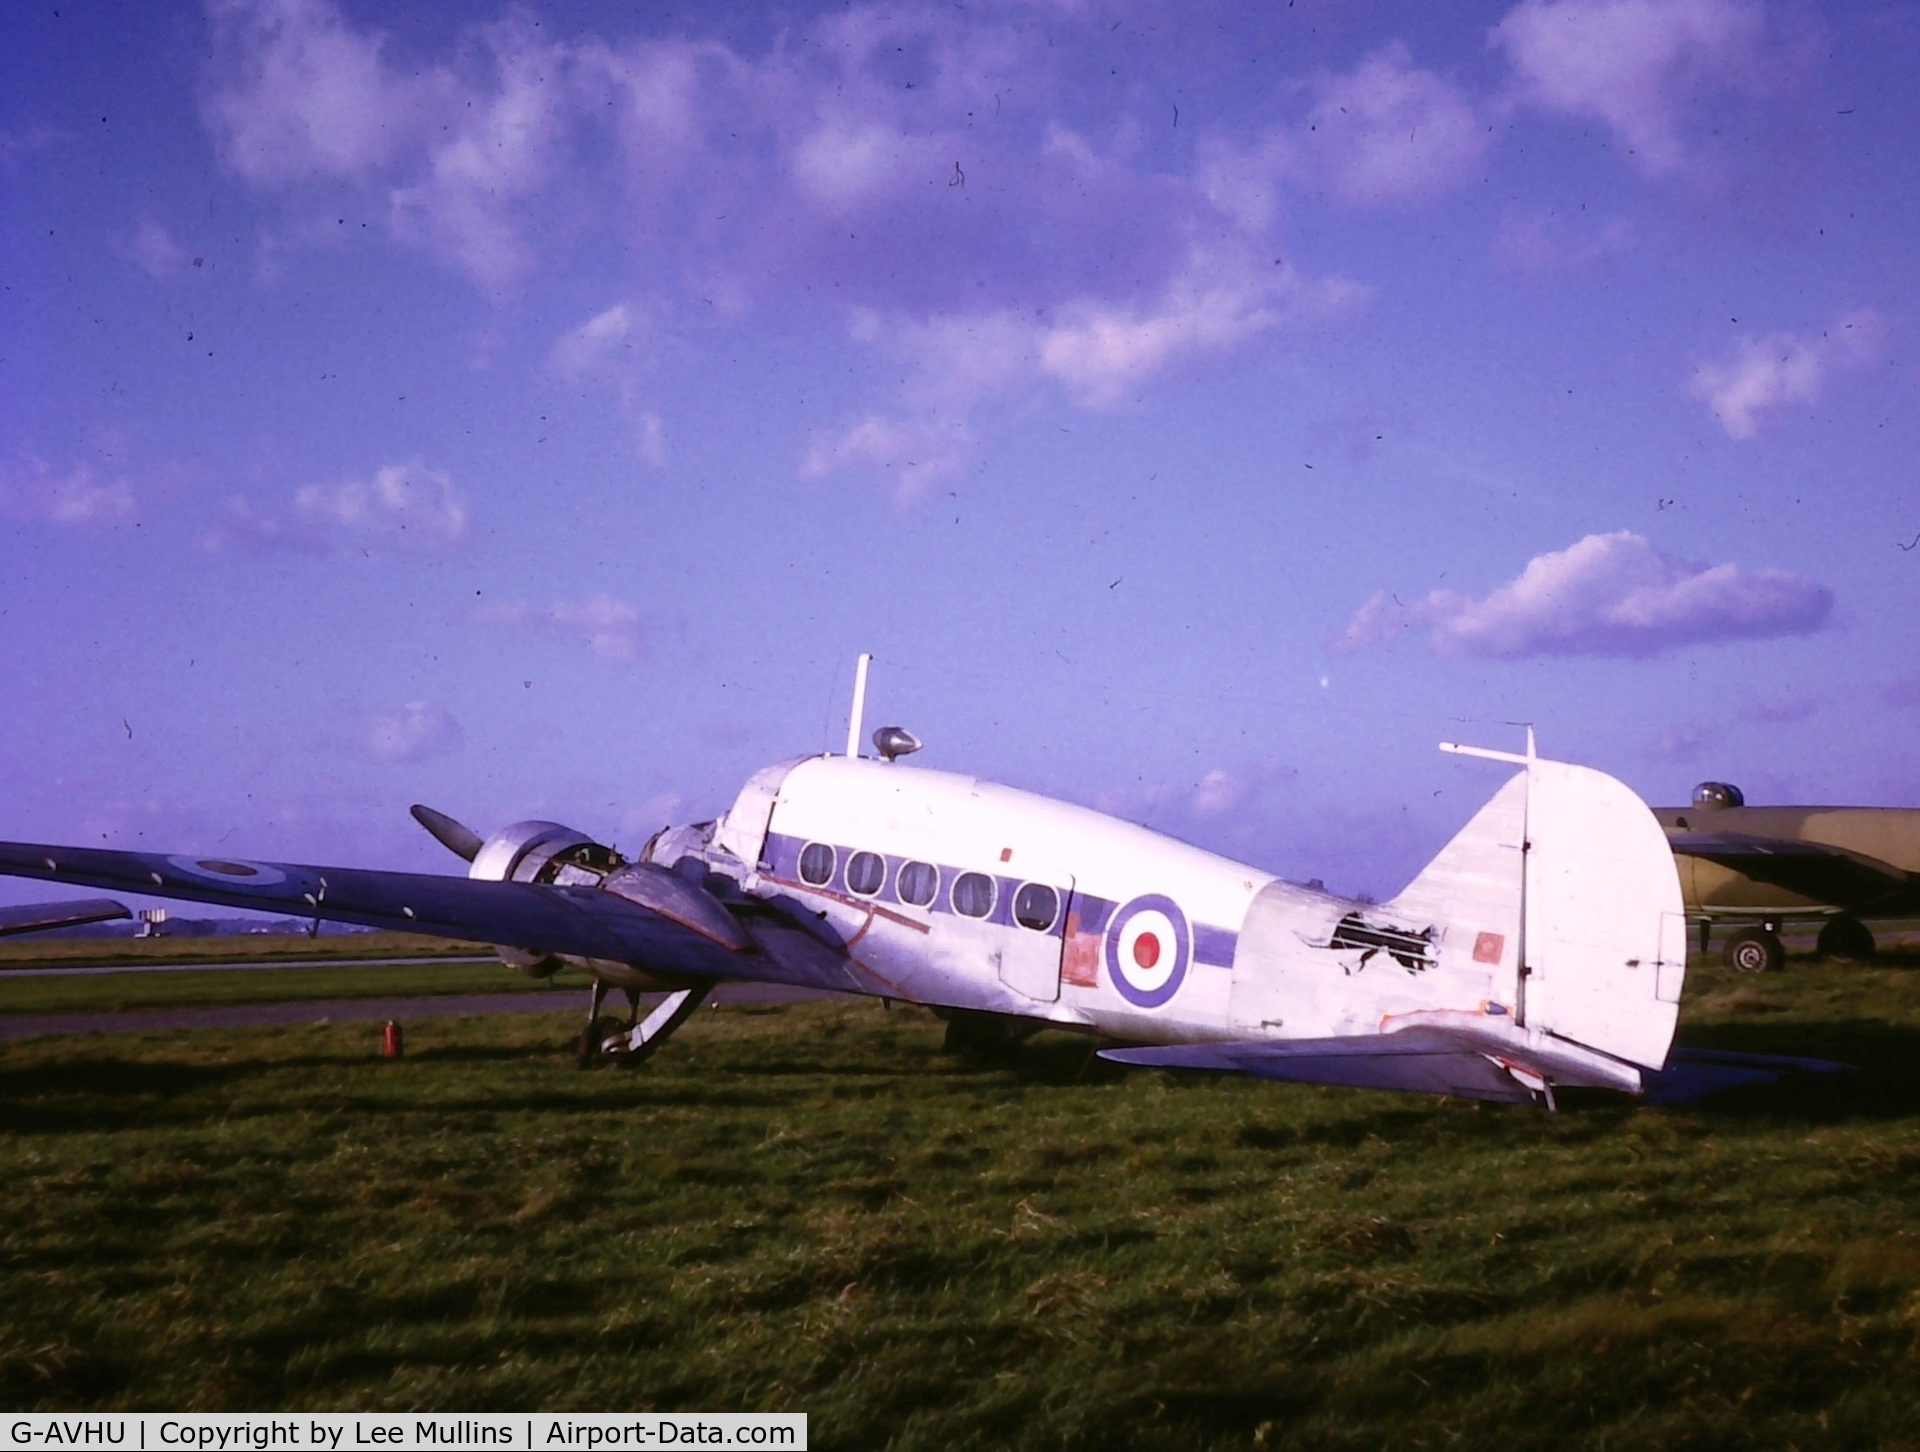 G-AVHU, Avro 652A Anson C.19 Srs 2 C/N 33783, Anson at Southend in the hands of the British Historic Aircraft Museum C1968